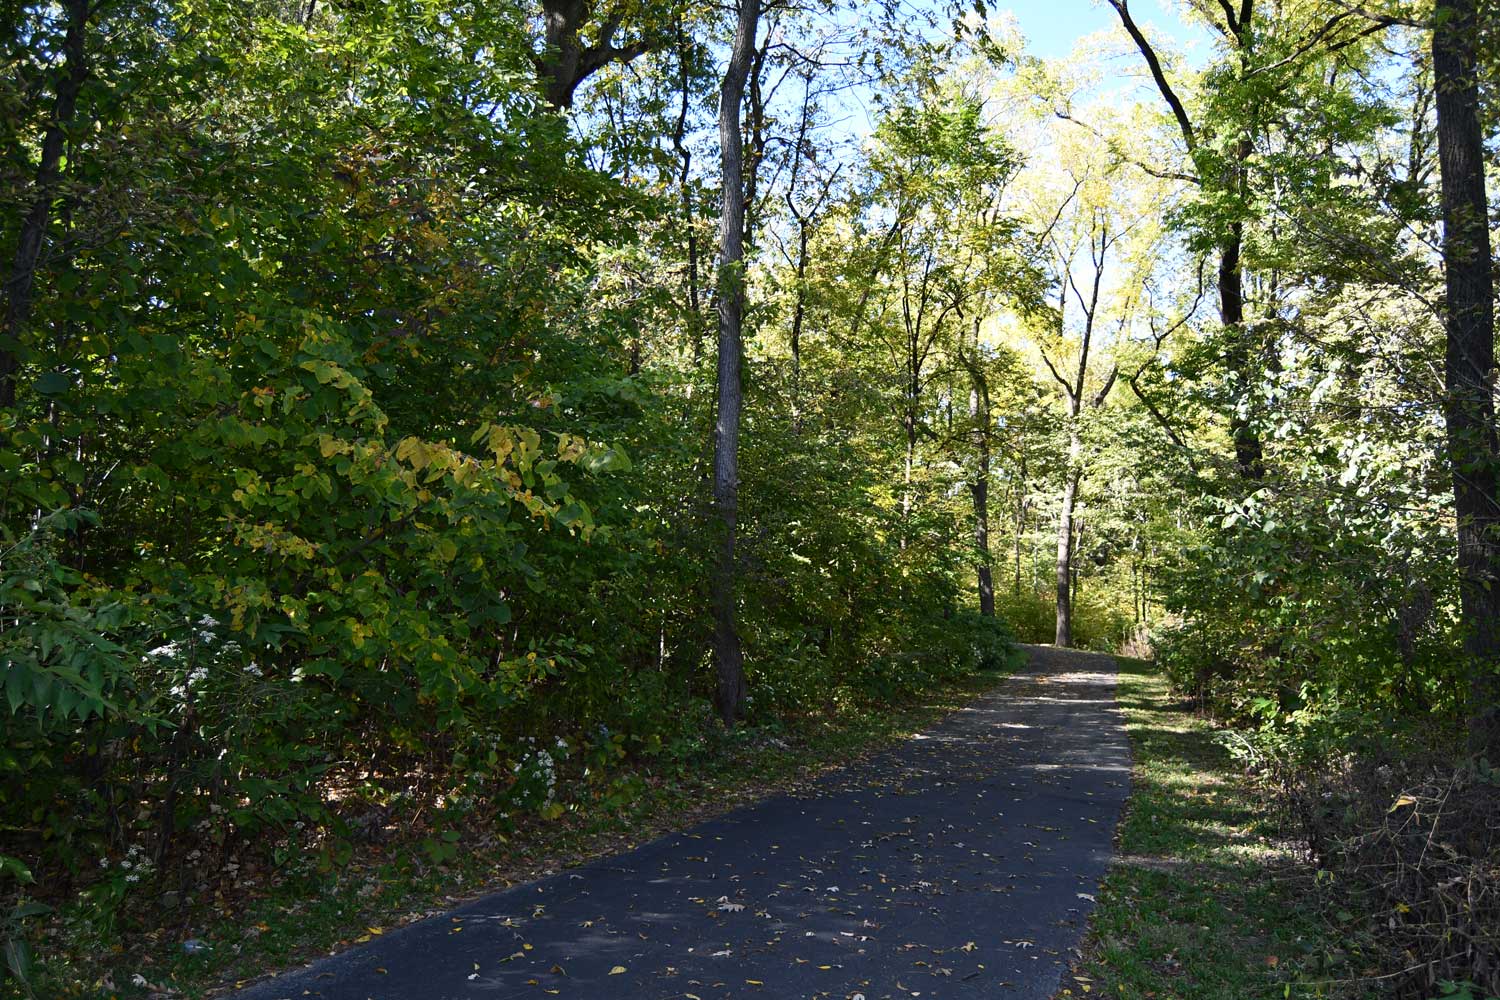 Paved trail lined with grasses and trees.